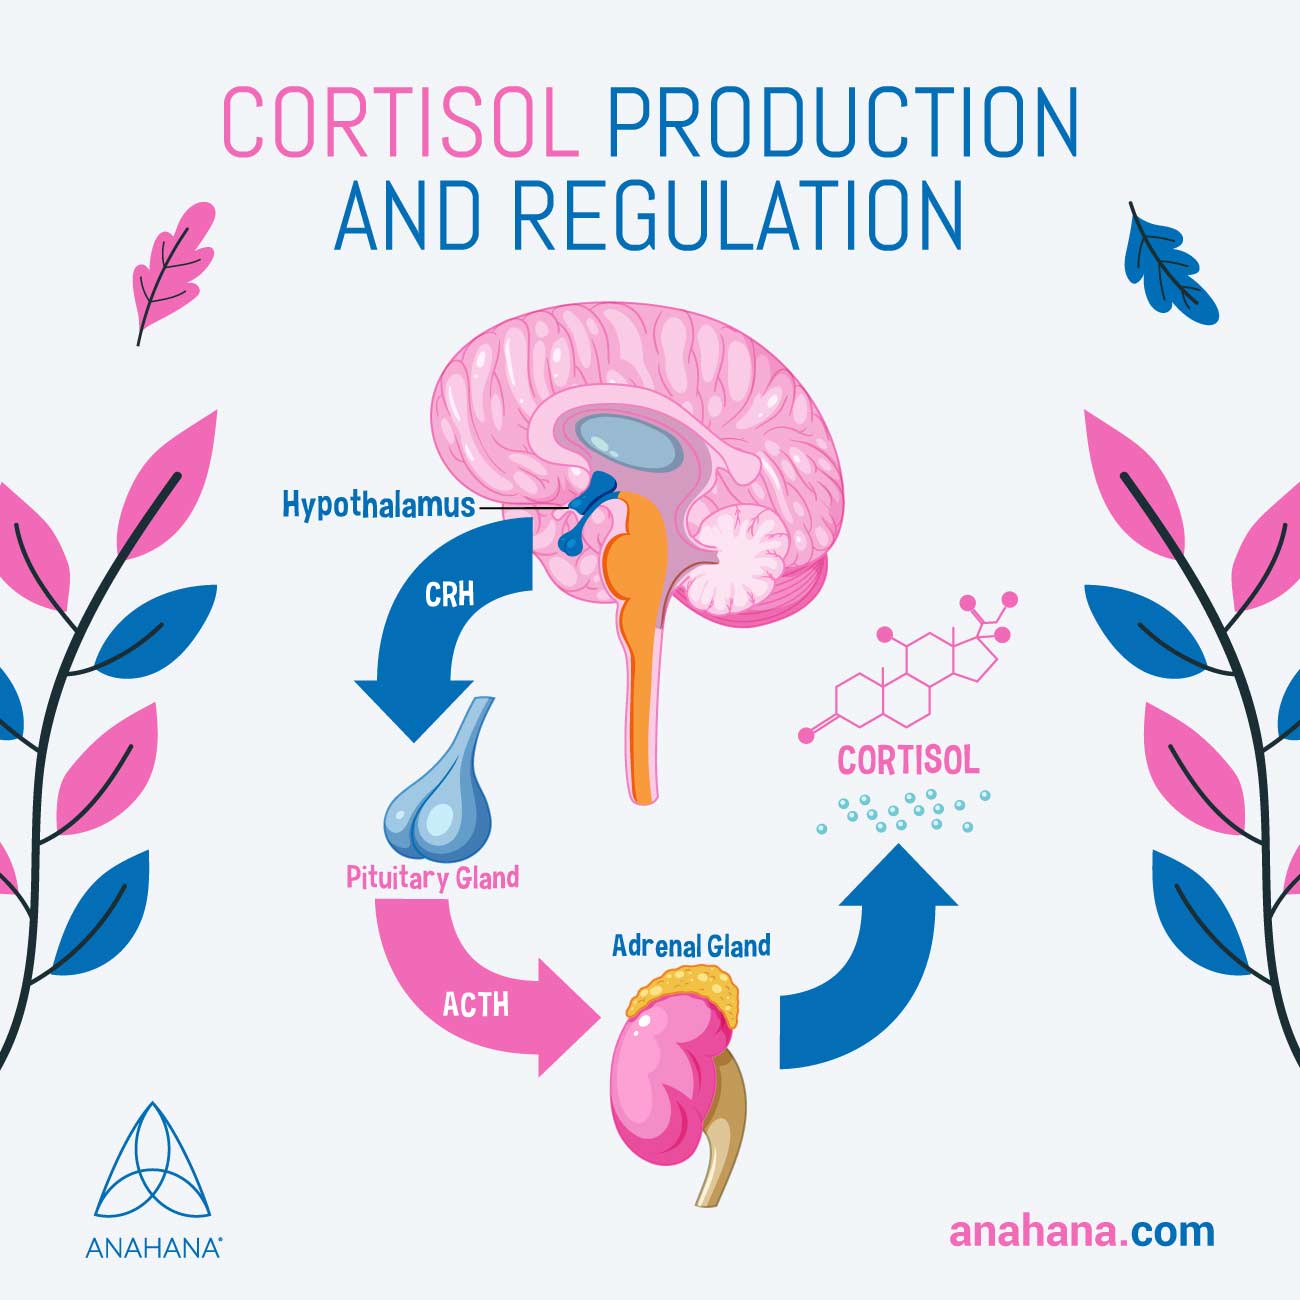 cortisol production and regulation explained